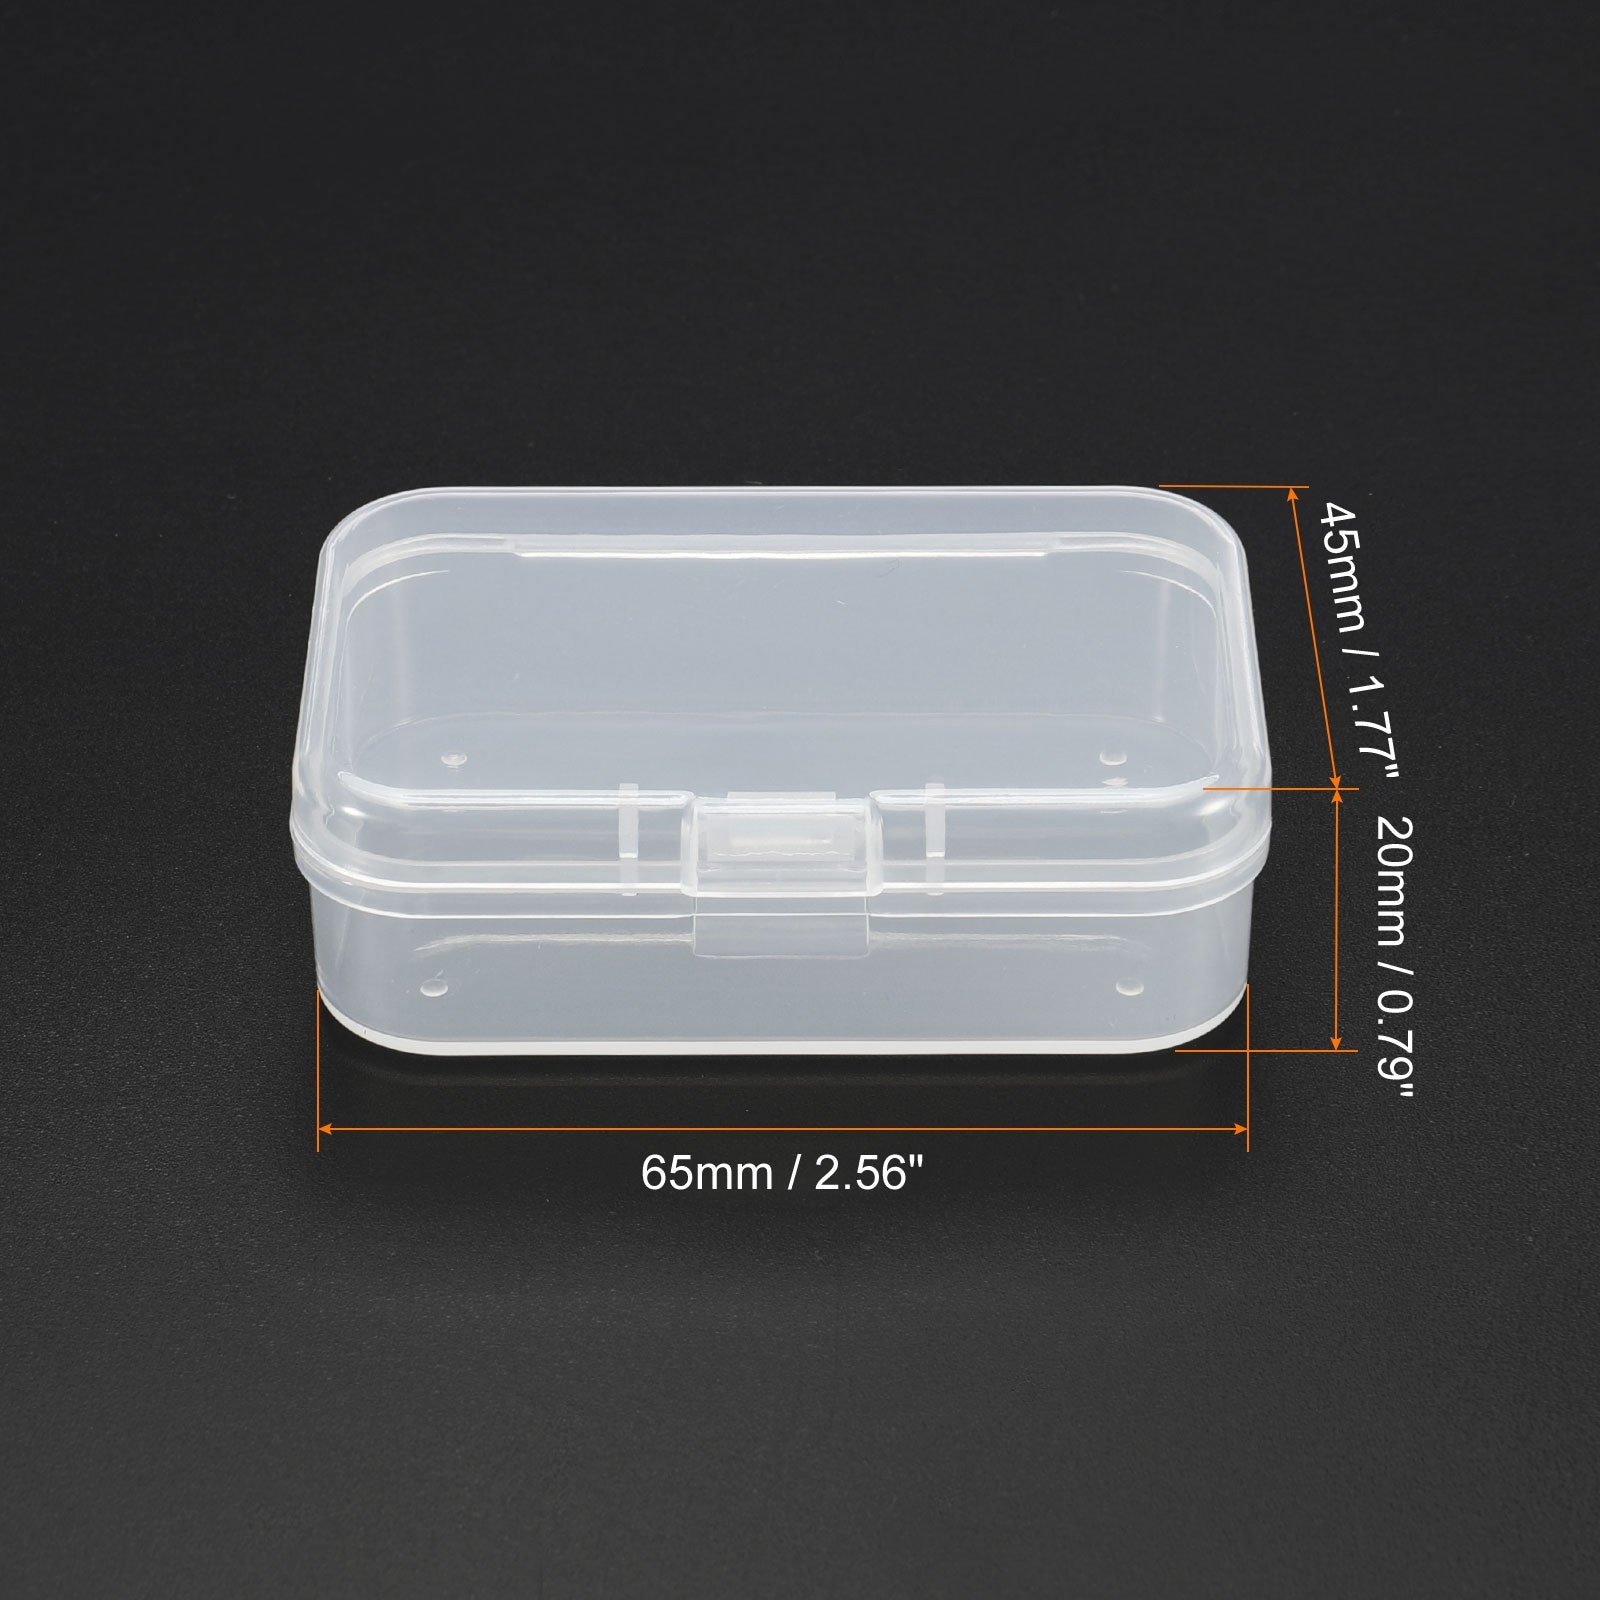 https://ak1.ostkcdn.com/images/products/is/images/direct/5e27ce73ce7c65dbf1615c6d91354f40f3d78b80/4pcs-Clear-Storage-Container-w-Hinged-Lid-Plastic-Rectangular-Box.jpg